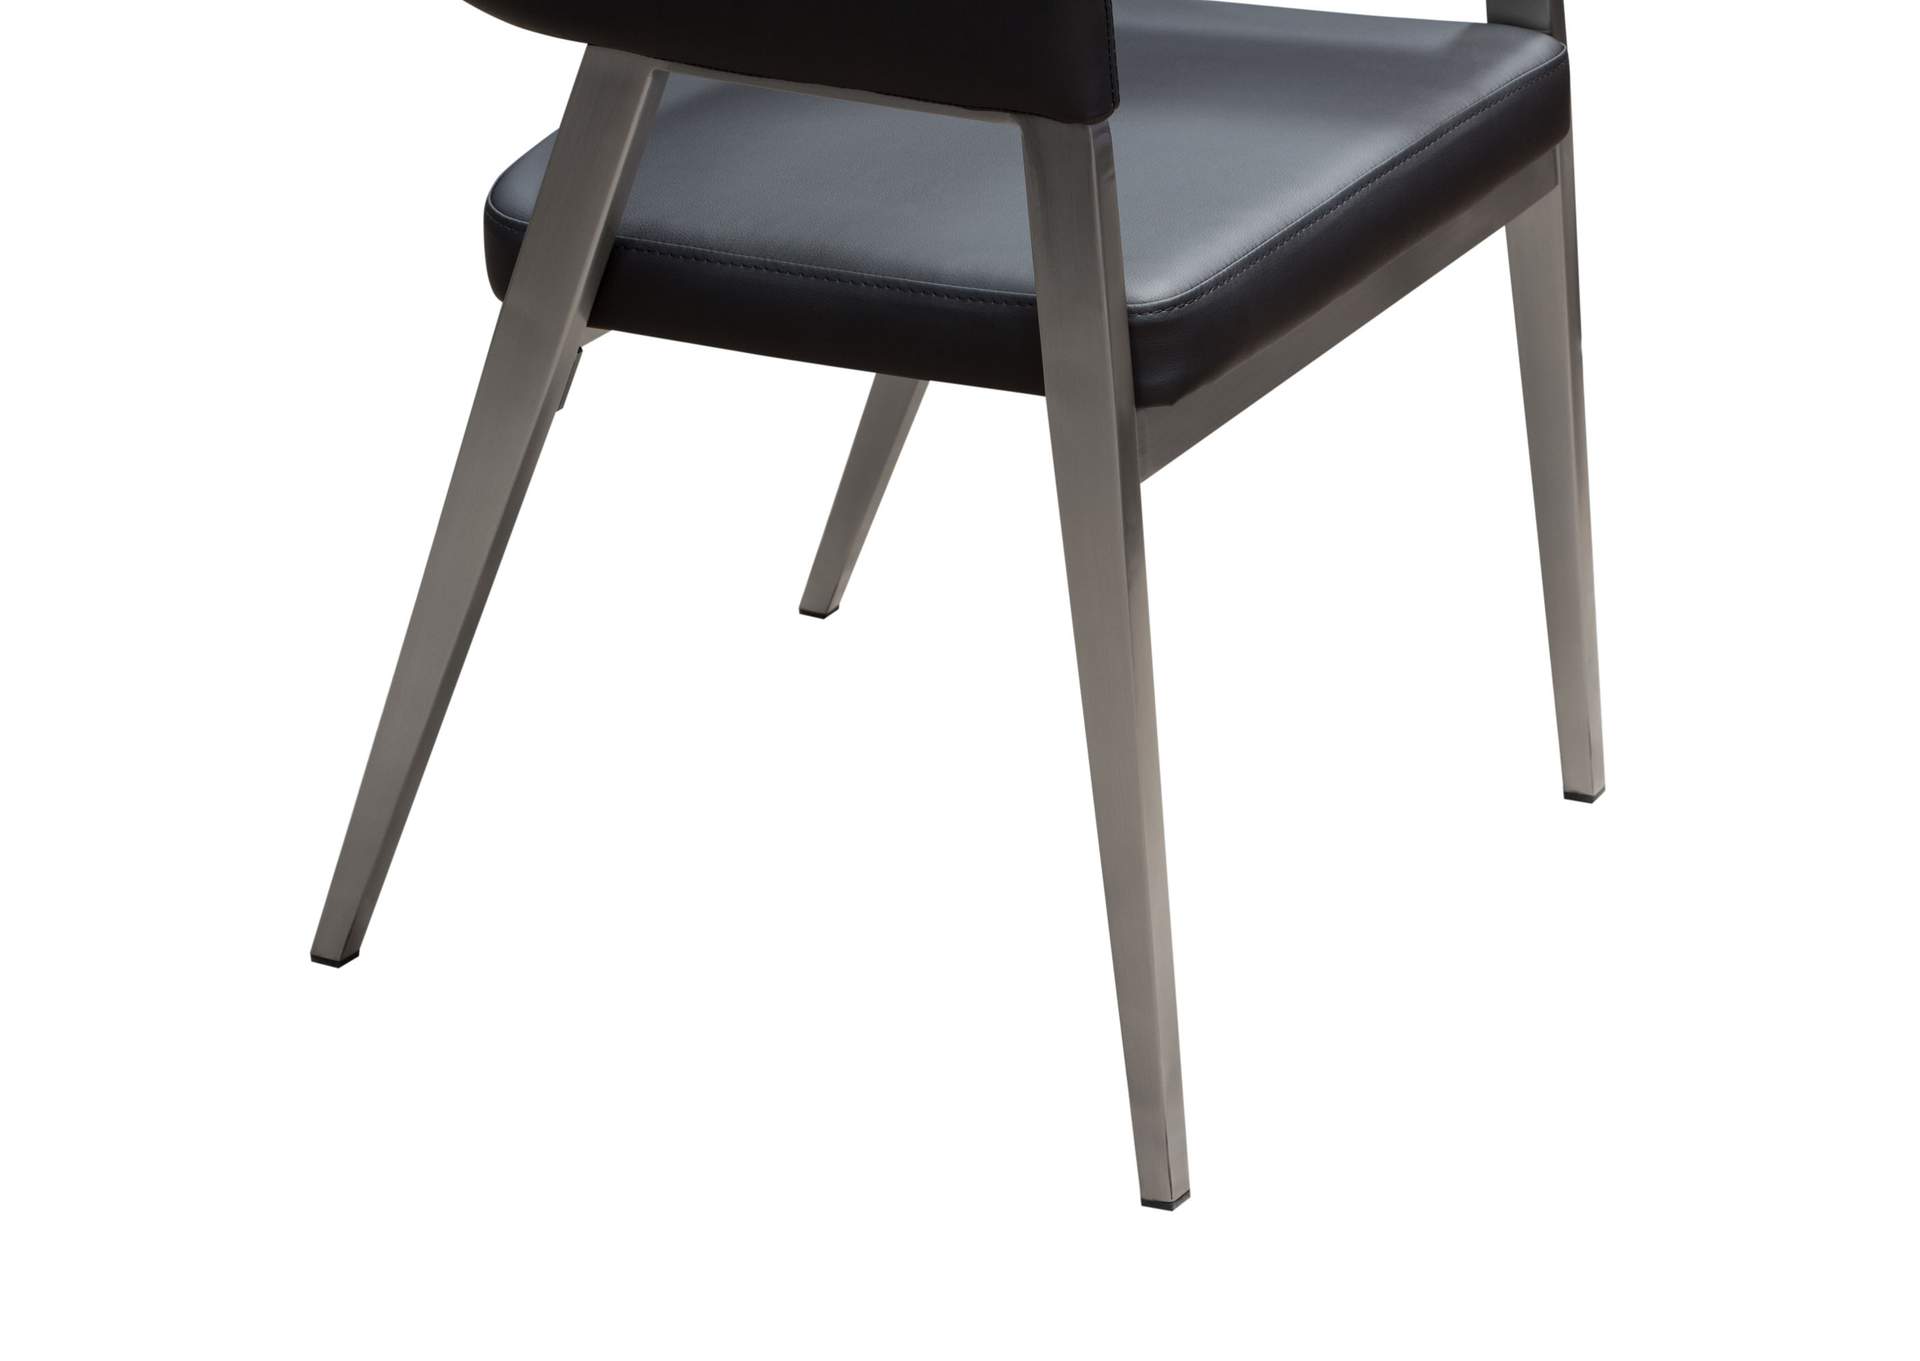 Adele Set of Two Dining/Accent Chairs in Black Leatherette w/ Brushed Stainless Steel Leg by Diamond Sofa,Diamond Sofa